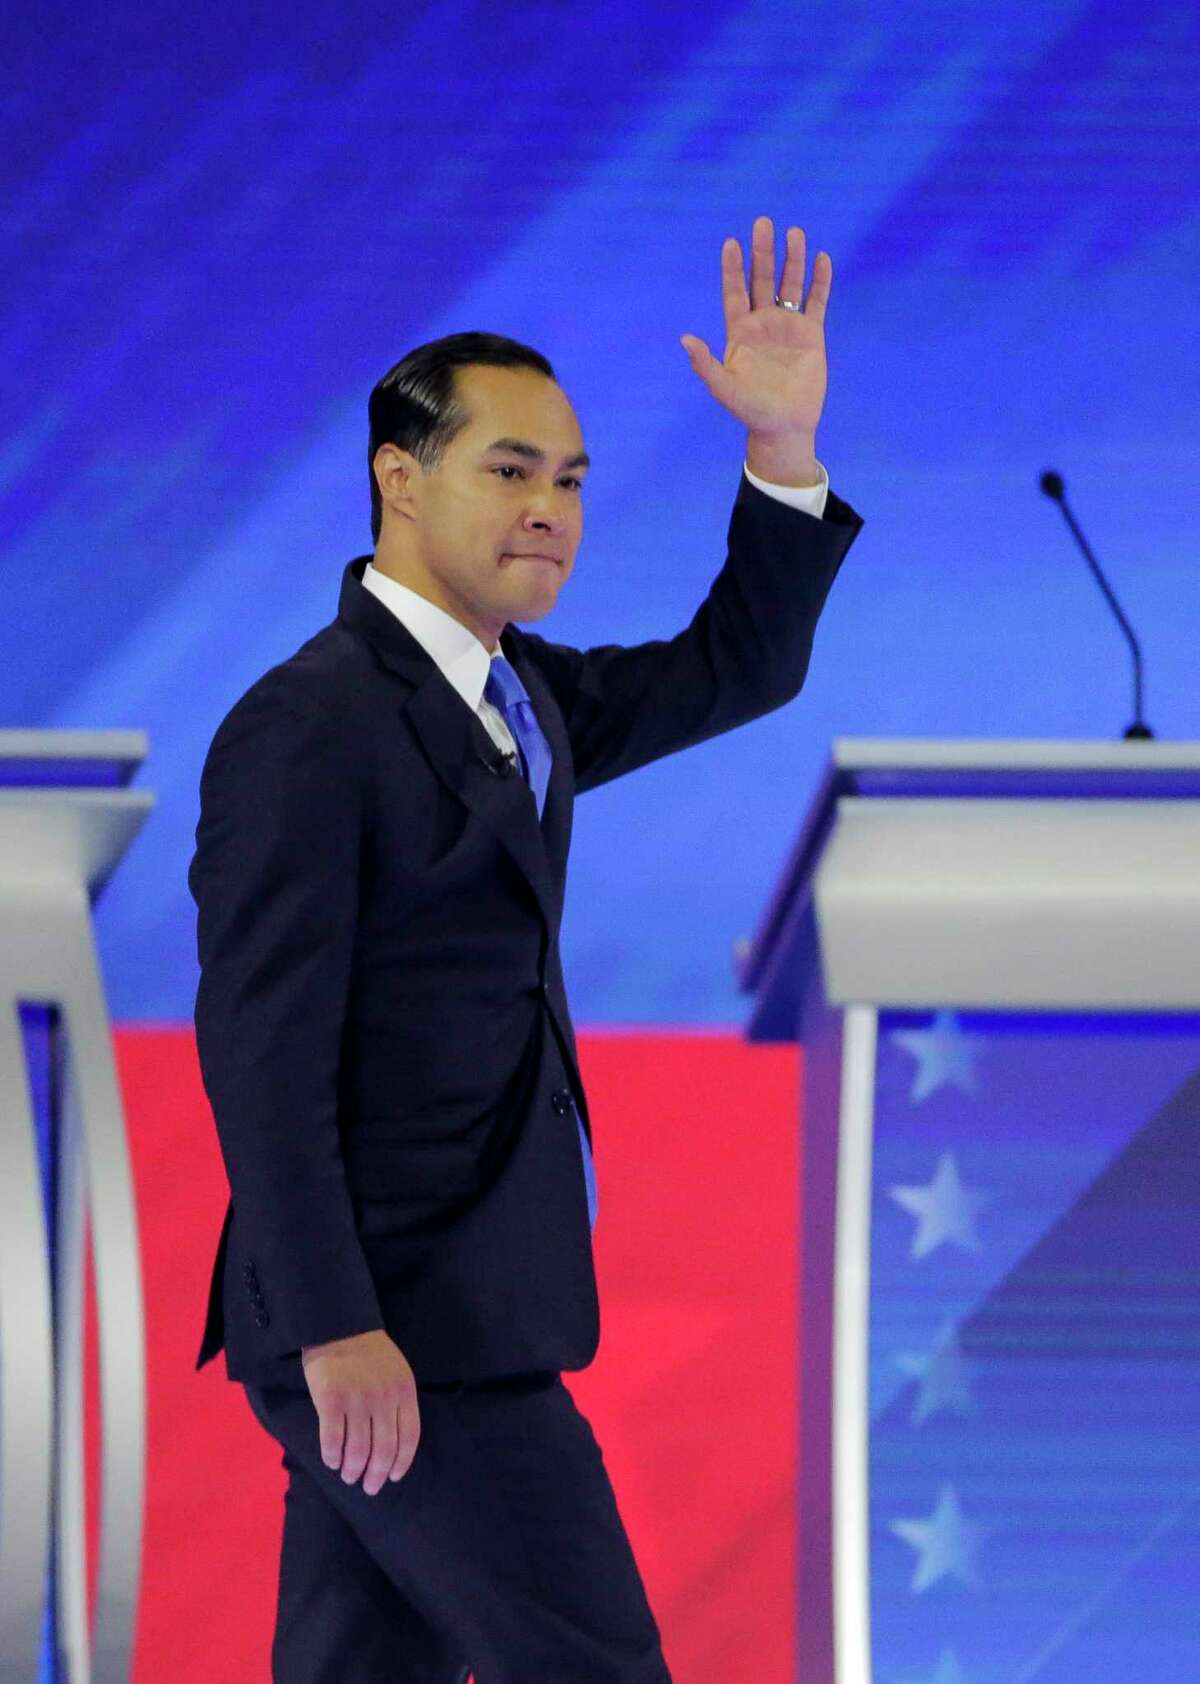 Democratic presidential candidate Former Housing Sec. Julian Castro is welcomed to the stage during the Democratic presidential debate inside Texas Southern University's Health & PE Arena in Houston, Thursday, Sept. 12, 2019.